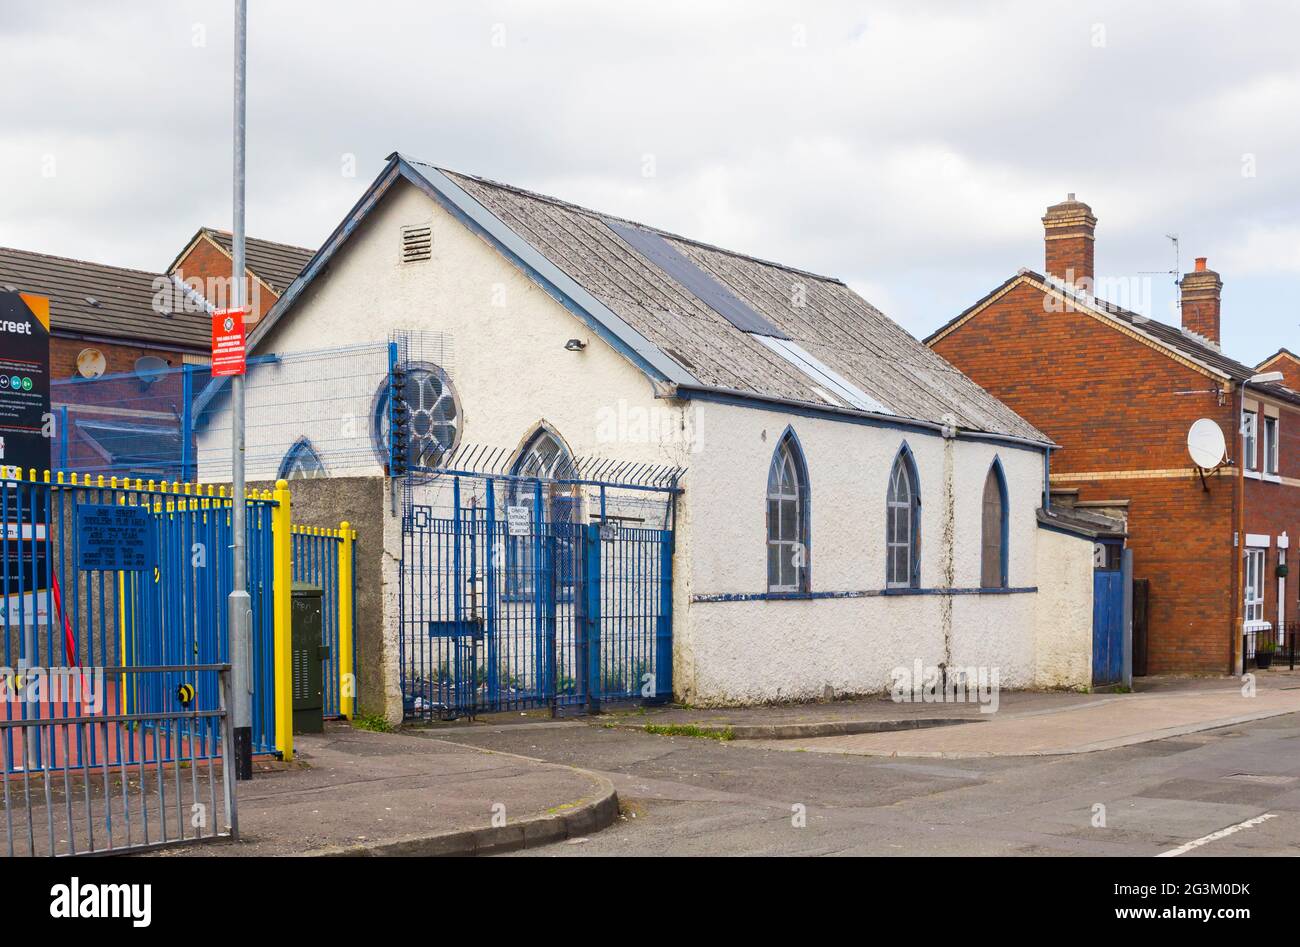 28 June 2019 The old Disraeli Street Mission Hall just off tyhe Crumlin Road in Belfast Northern Ireland. Another marker in the decline of traditional Stock Photo